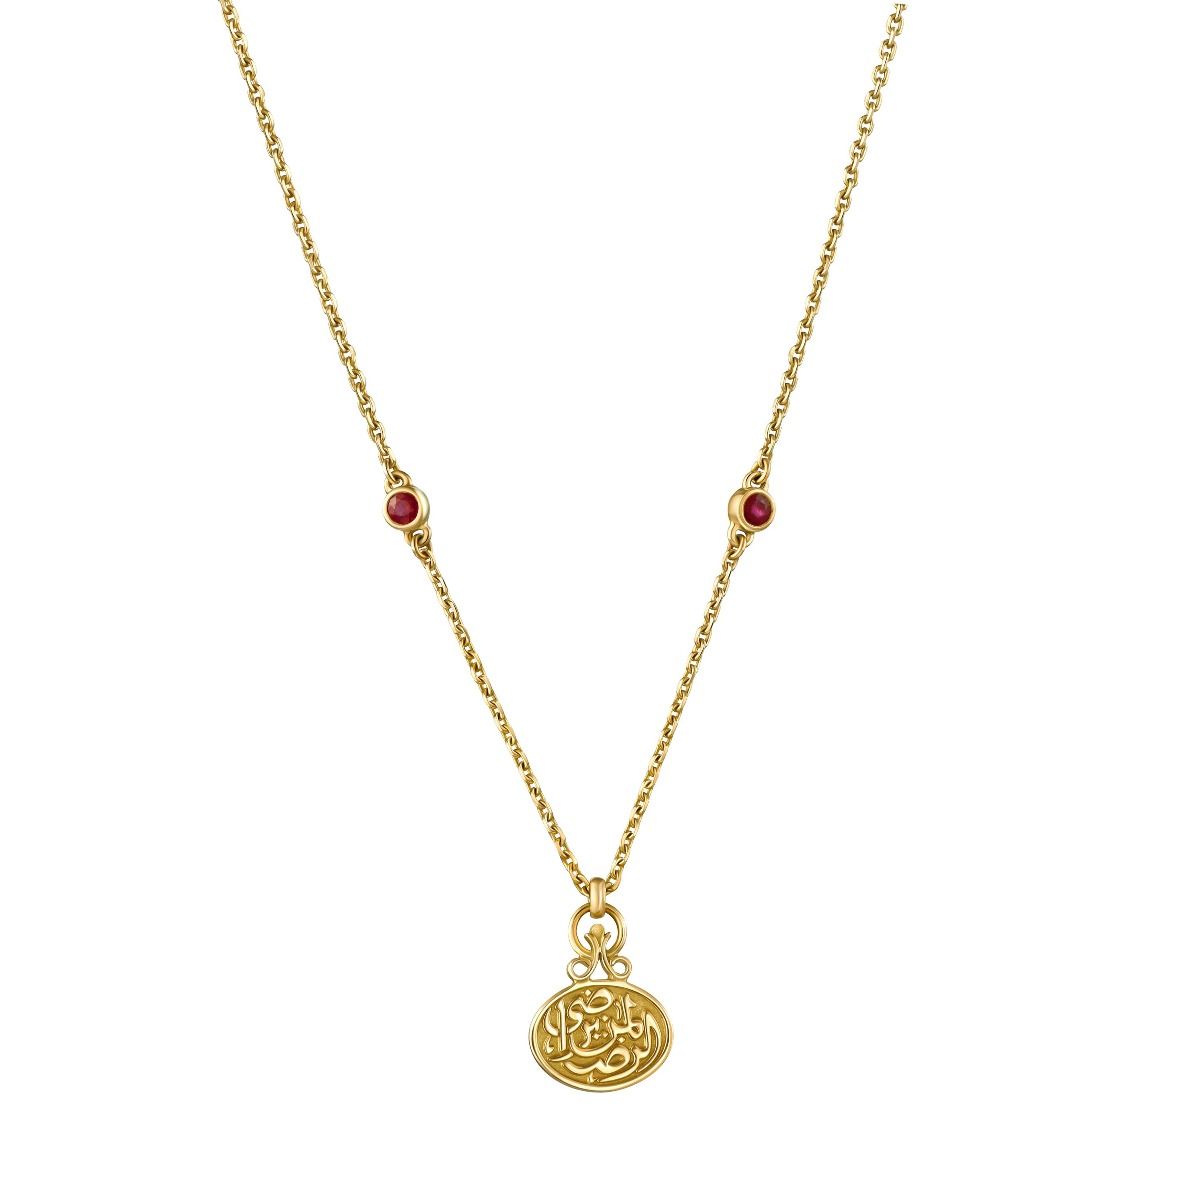 Contentment Necklace by Azza Fahmy - Designer Necklaces